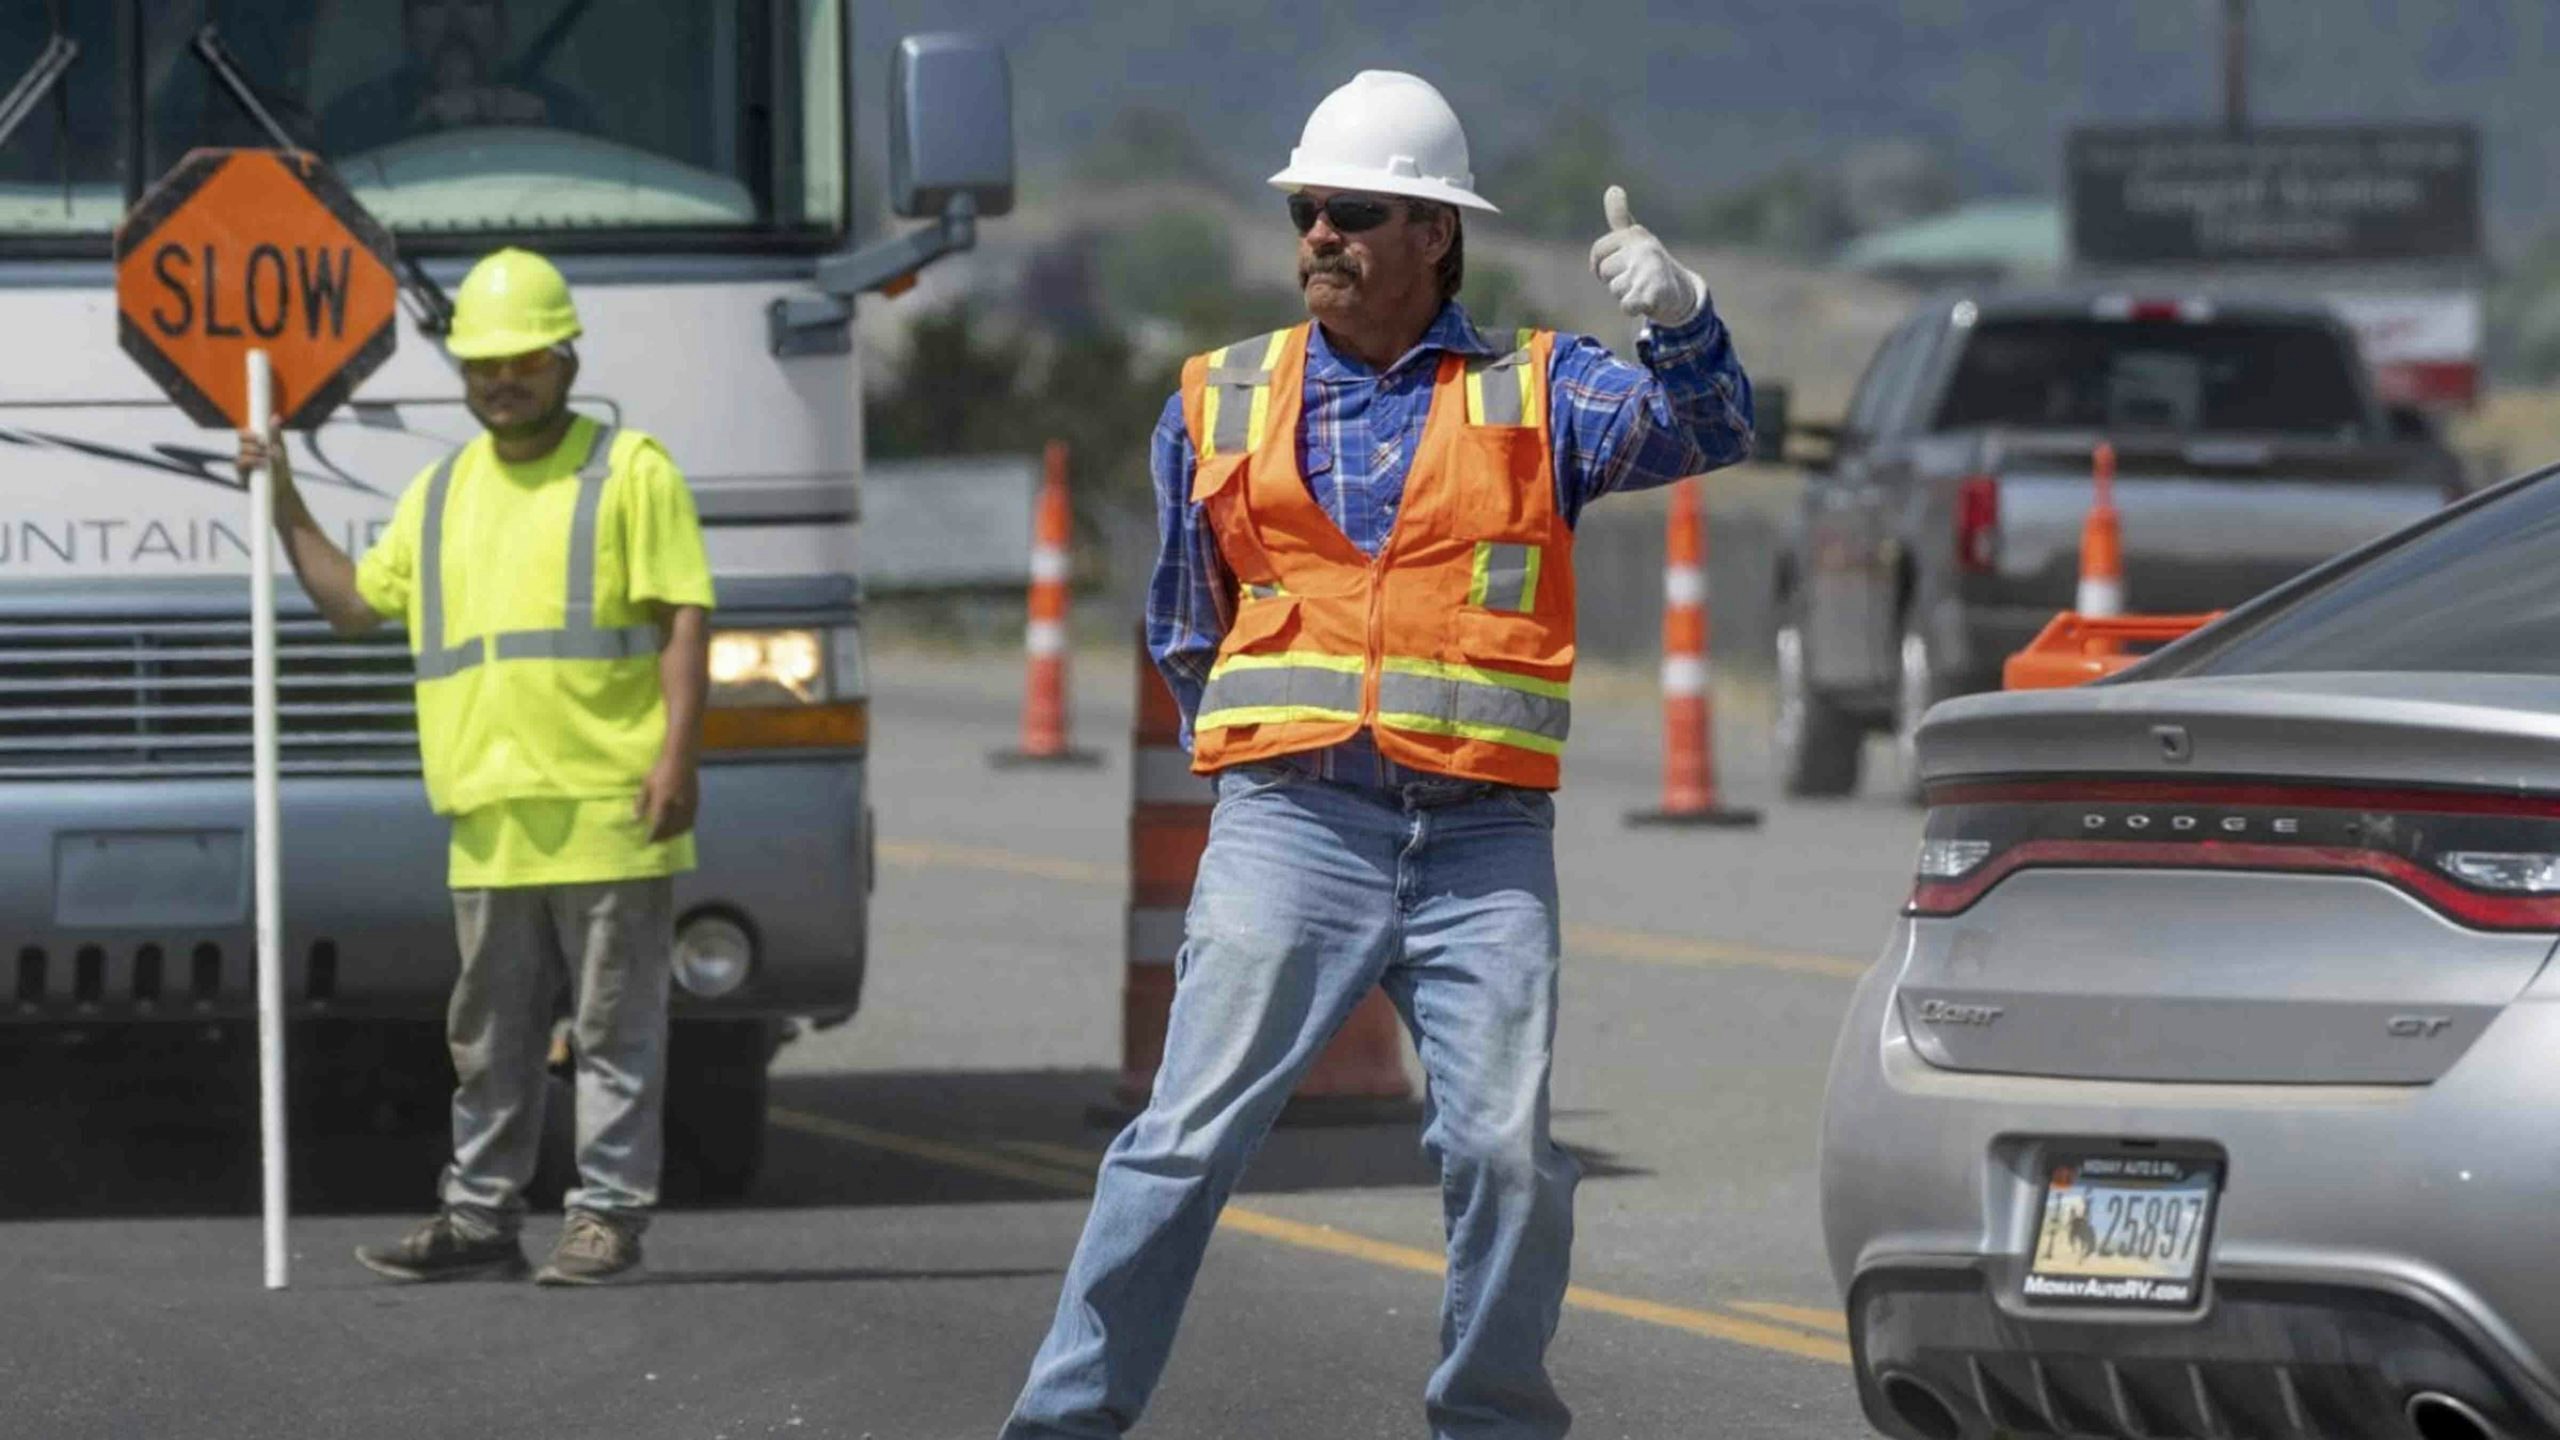 Dancing road worker scaled